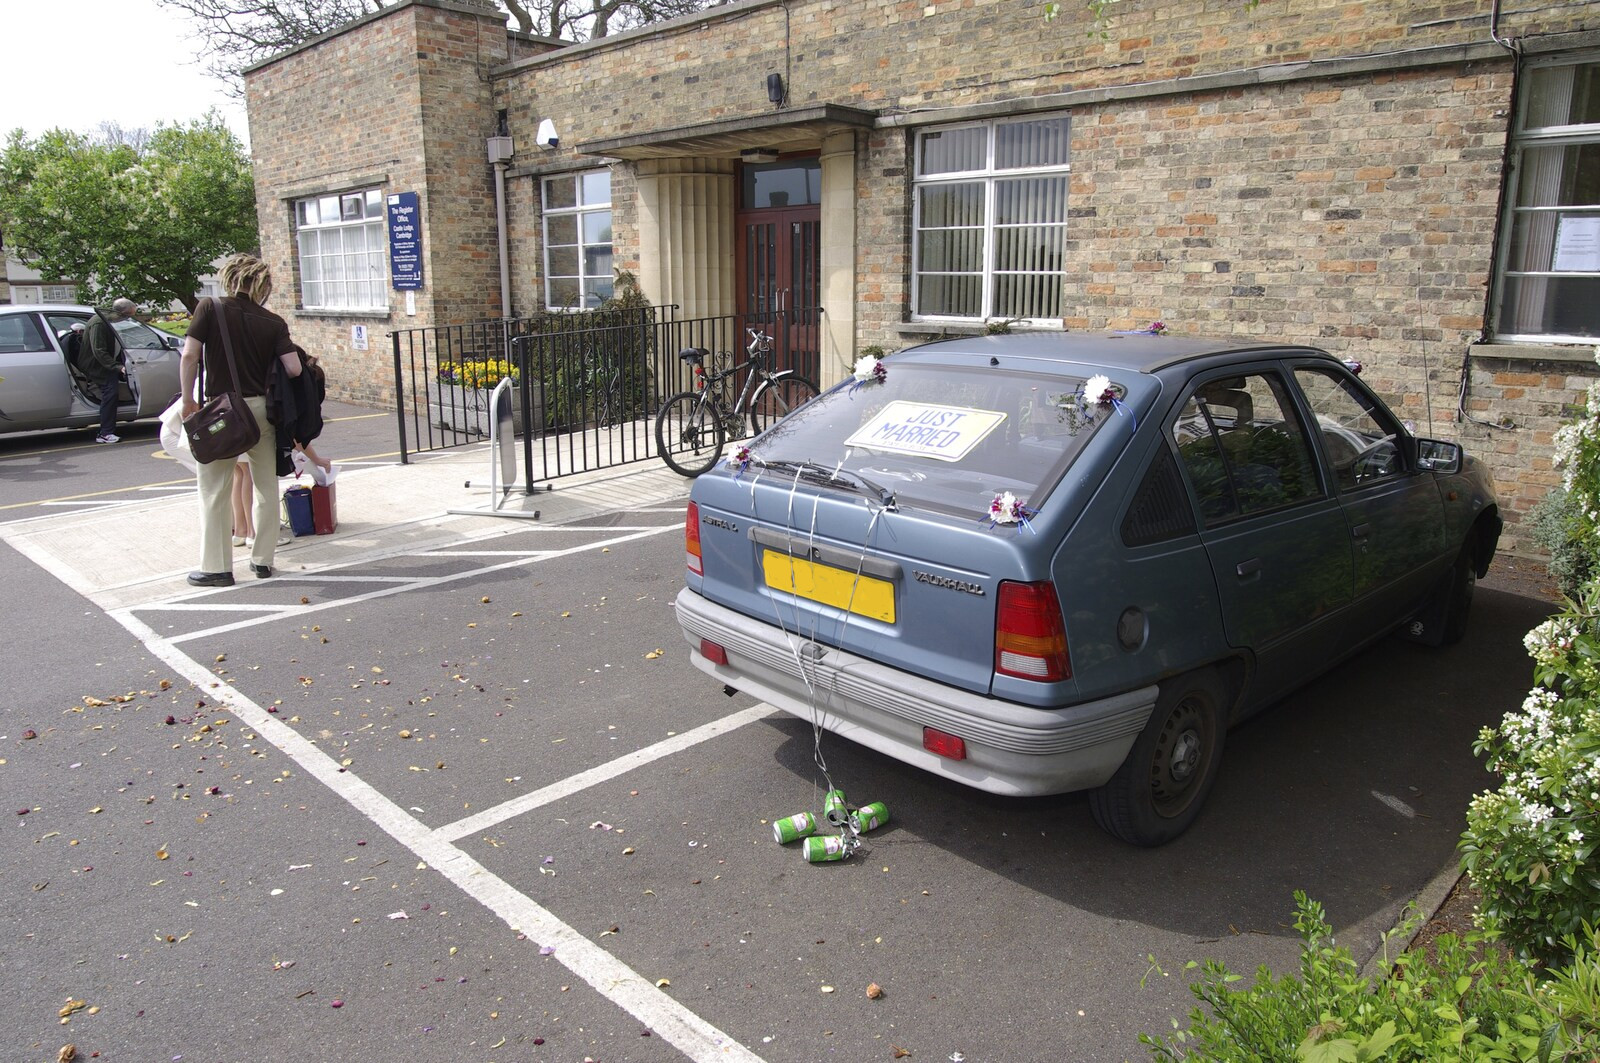 Hani and Anne's Wedding, County Hall, Cambridge - 2nd May 2008: Nosher's old car is all canned up